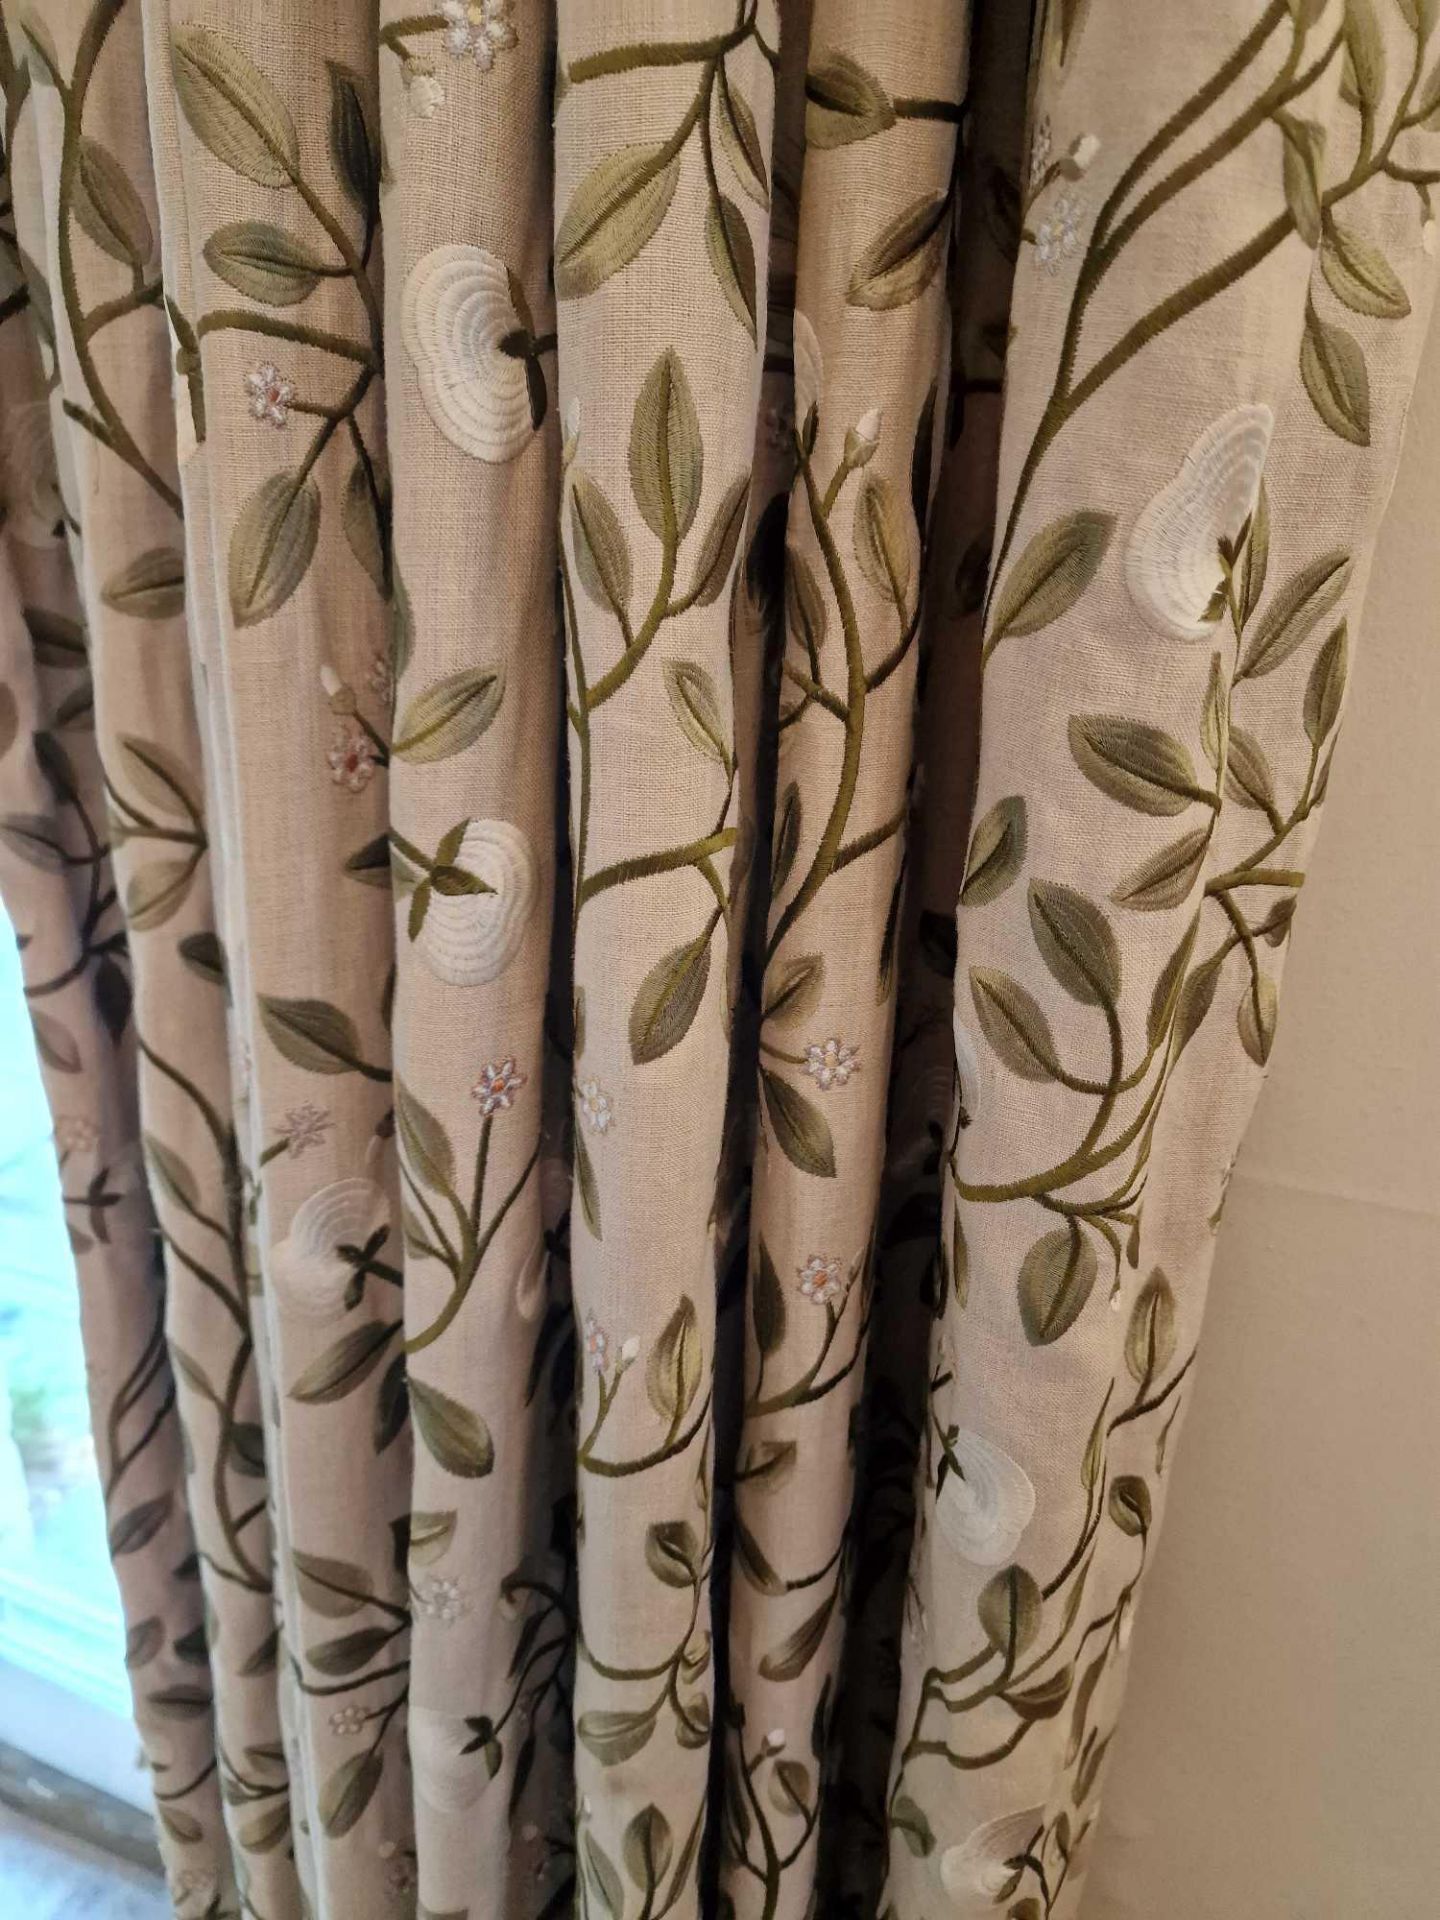 A Set Of 3 x Heavy Fire Retardant Drapes Cream With An Embroidered Green Leaf And Floral Pattern (1) - Image 2 of 6